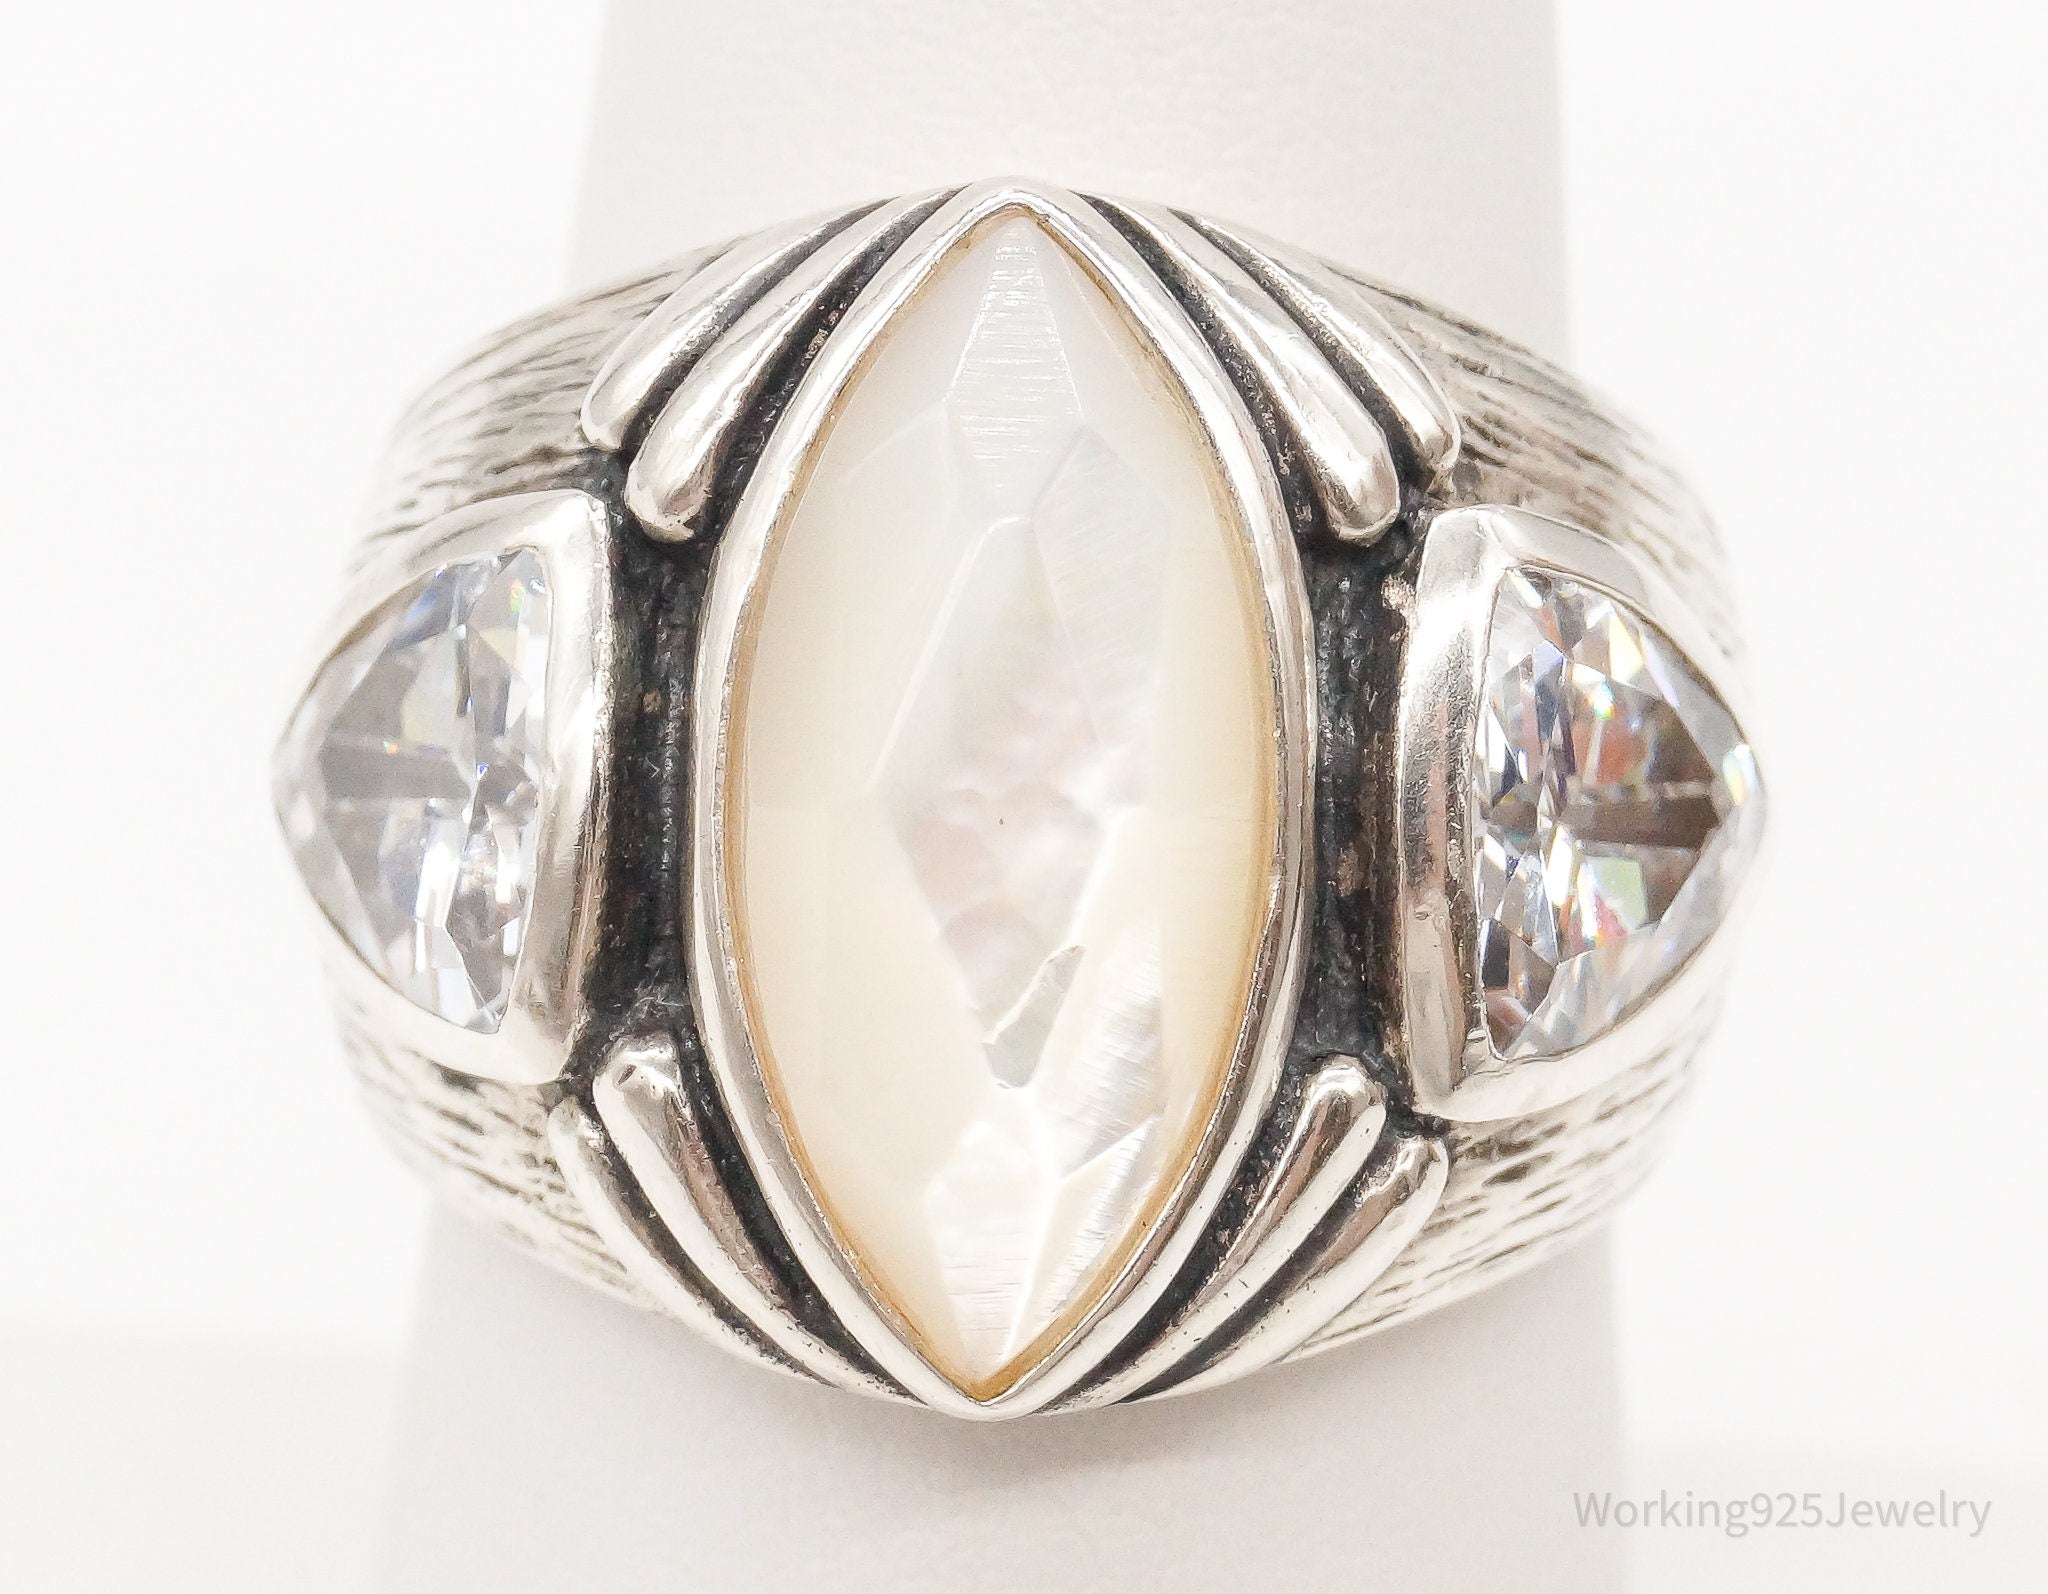 Designer Silpada Mother Of Pearl Cubic Zirconia Sterling Silver Ring Size 7.25